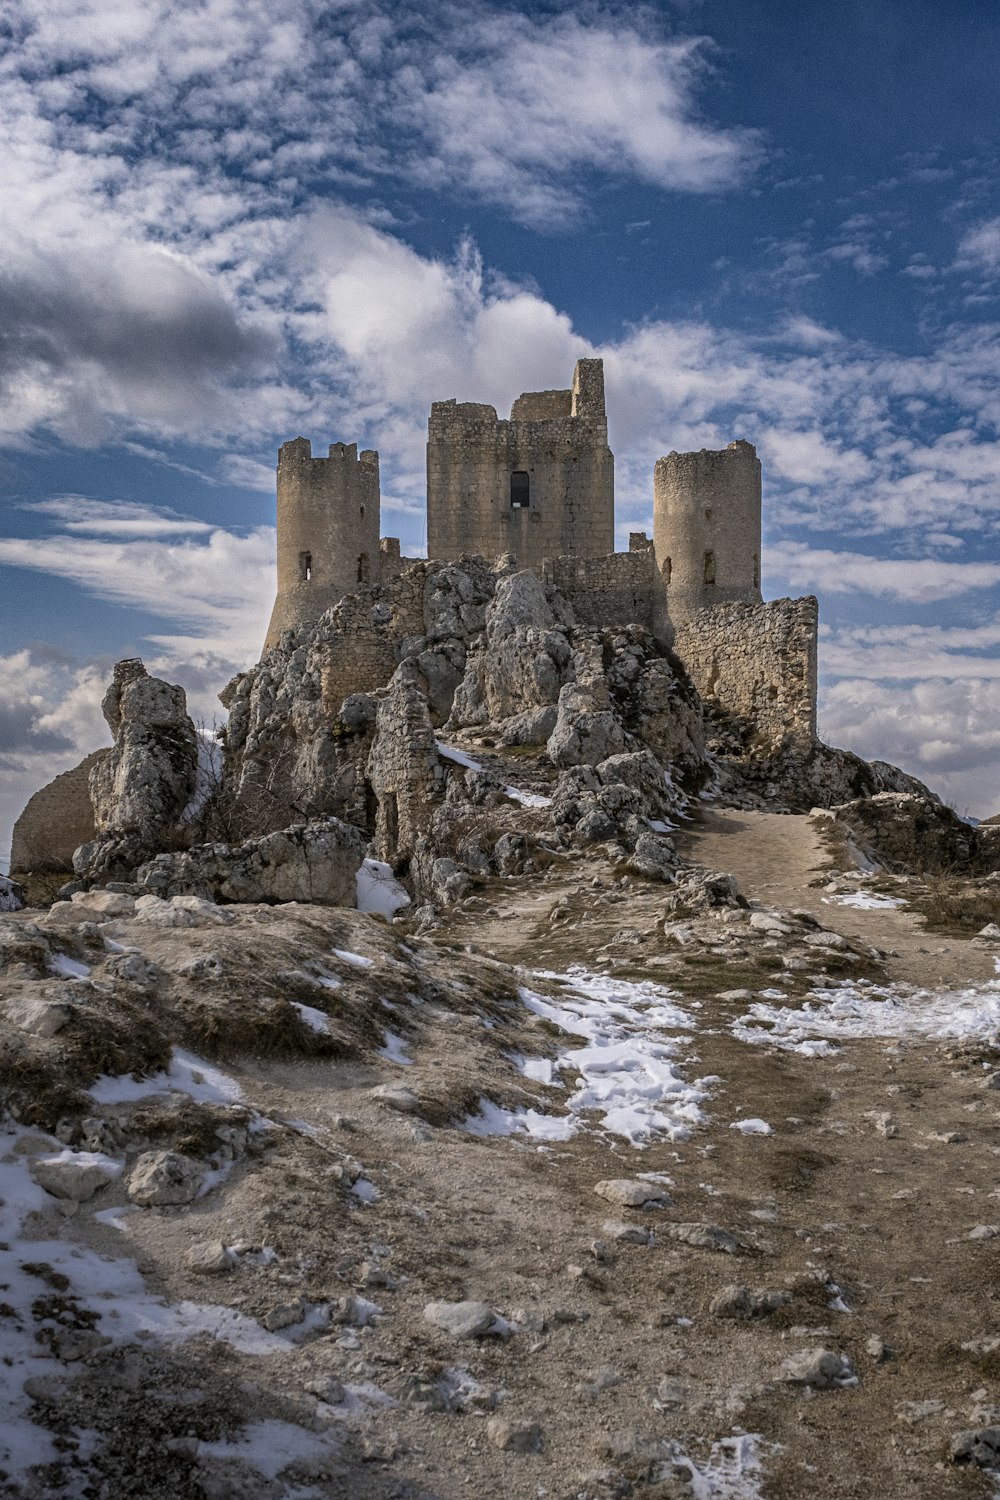 a castle sitting on top of a rocky hill